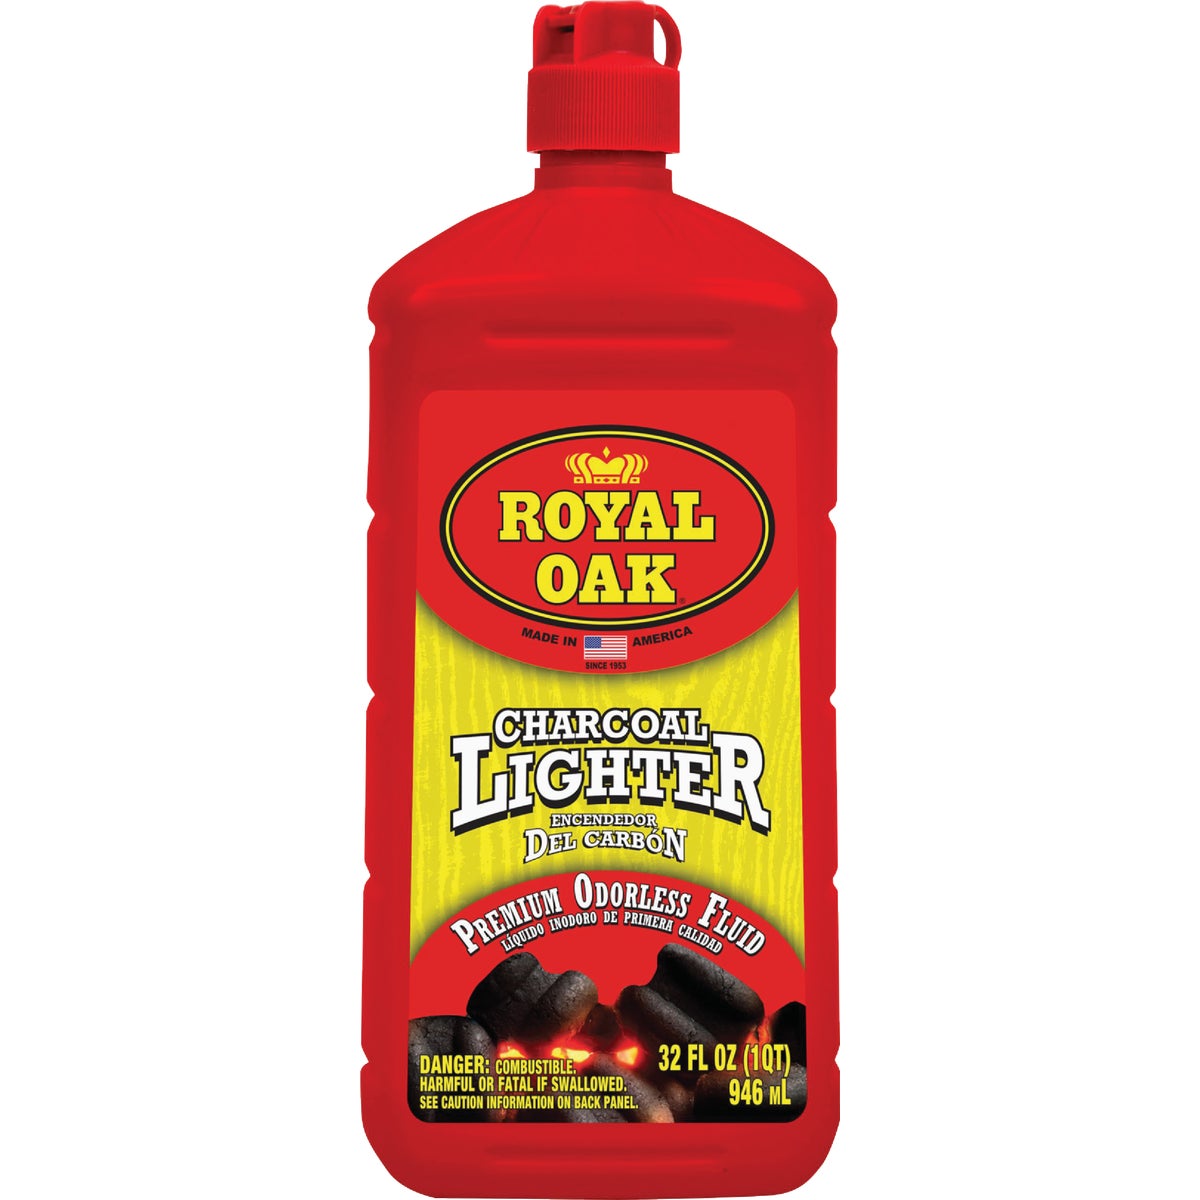 Item 819611, Charcoal lighter fluid makes it quick and easy to light your charcoal.